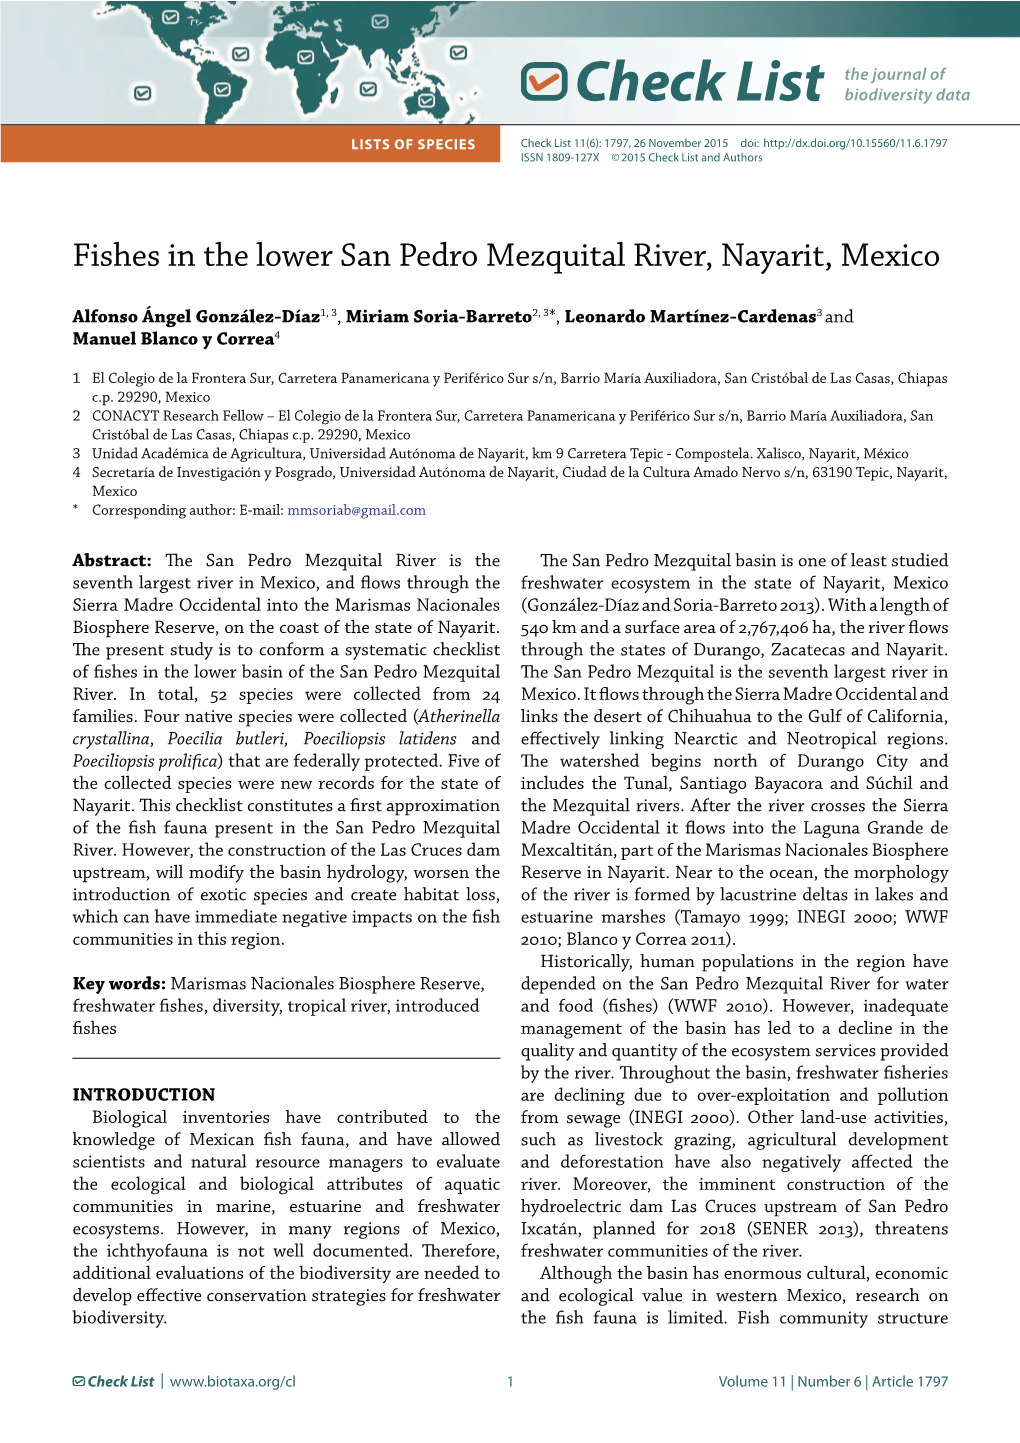 Fishes in the Lower San Pedro Mezquital River, Nayarit, Mexico